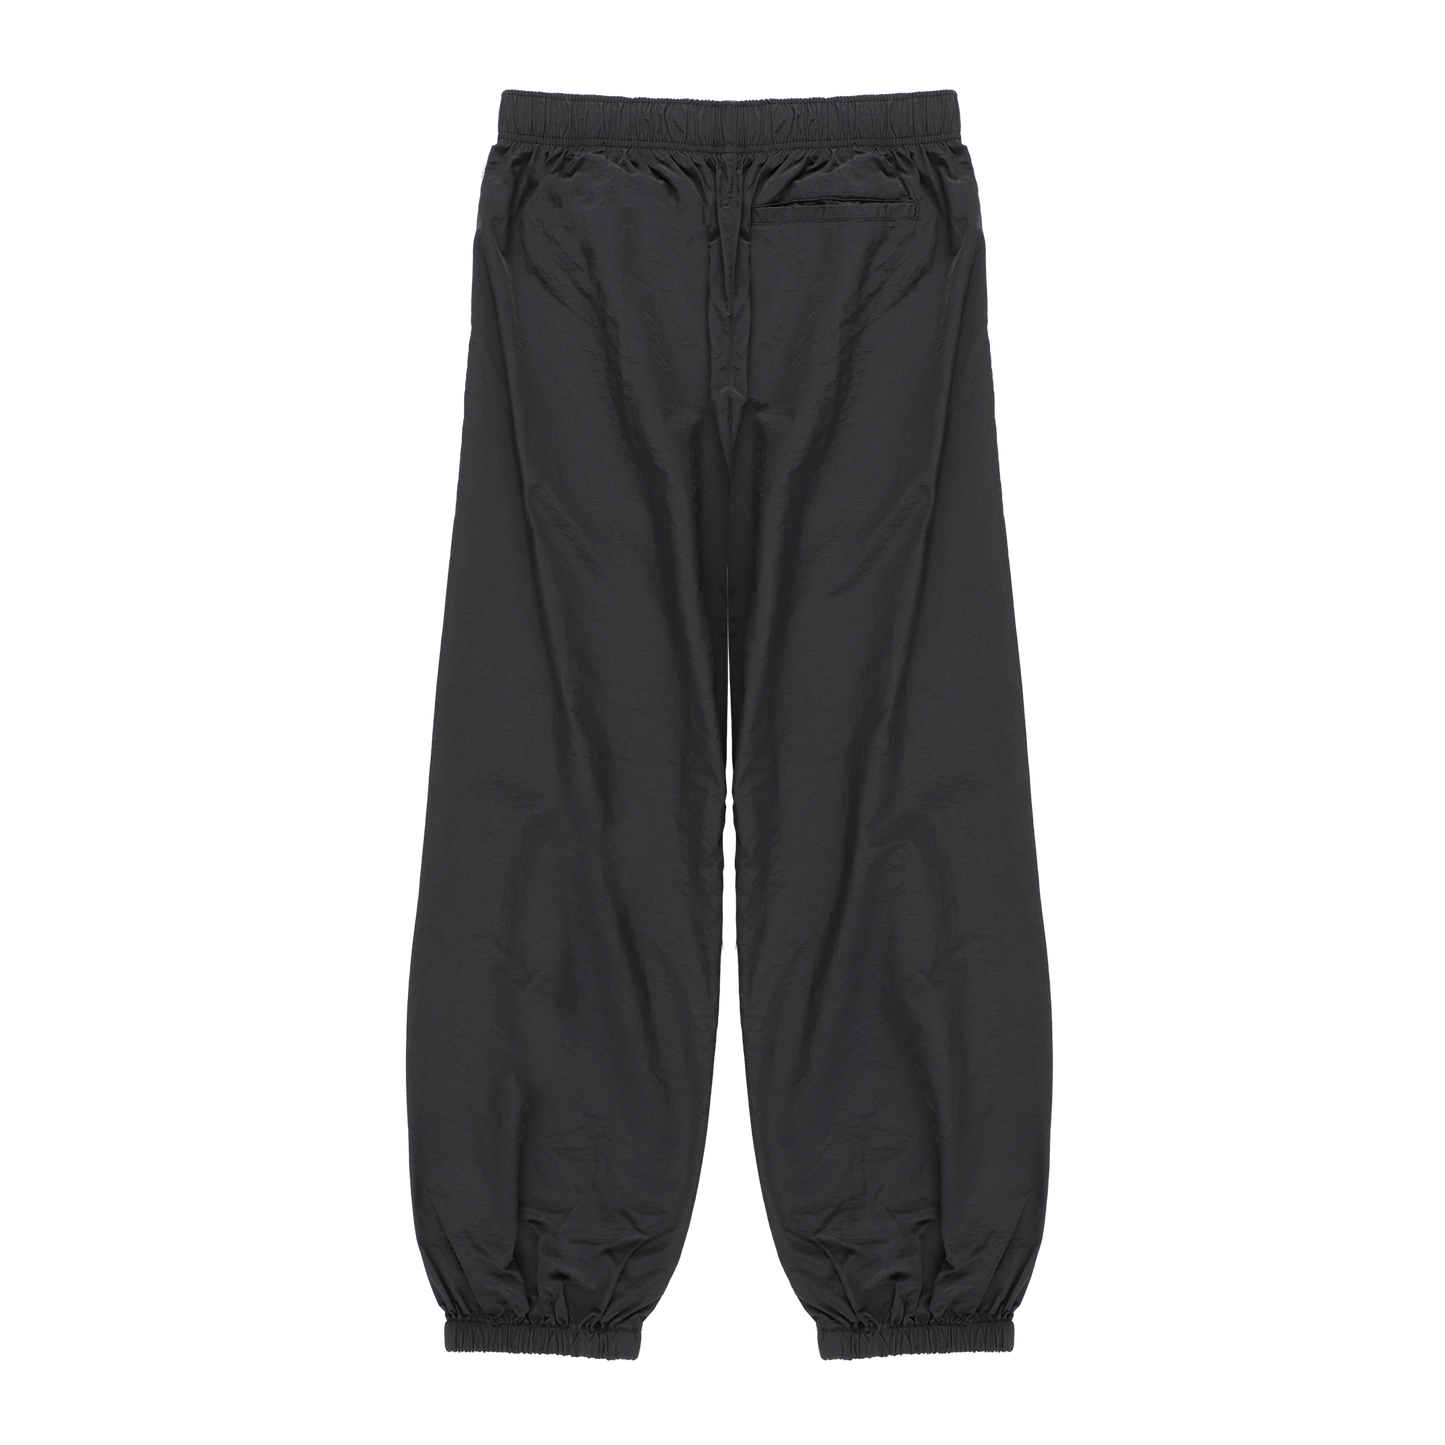 TRACK PANTS BLACK ( STUDY 7.01 : MULTIPLE EMBROIDERY) W/O LOGOS